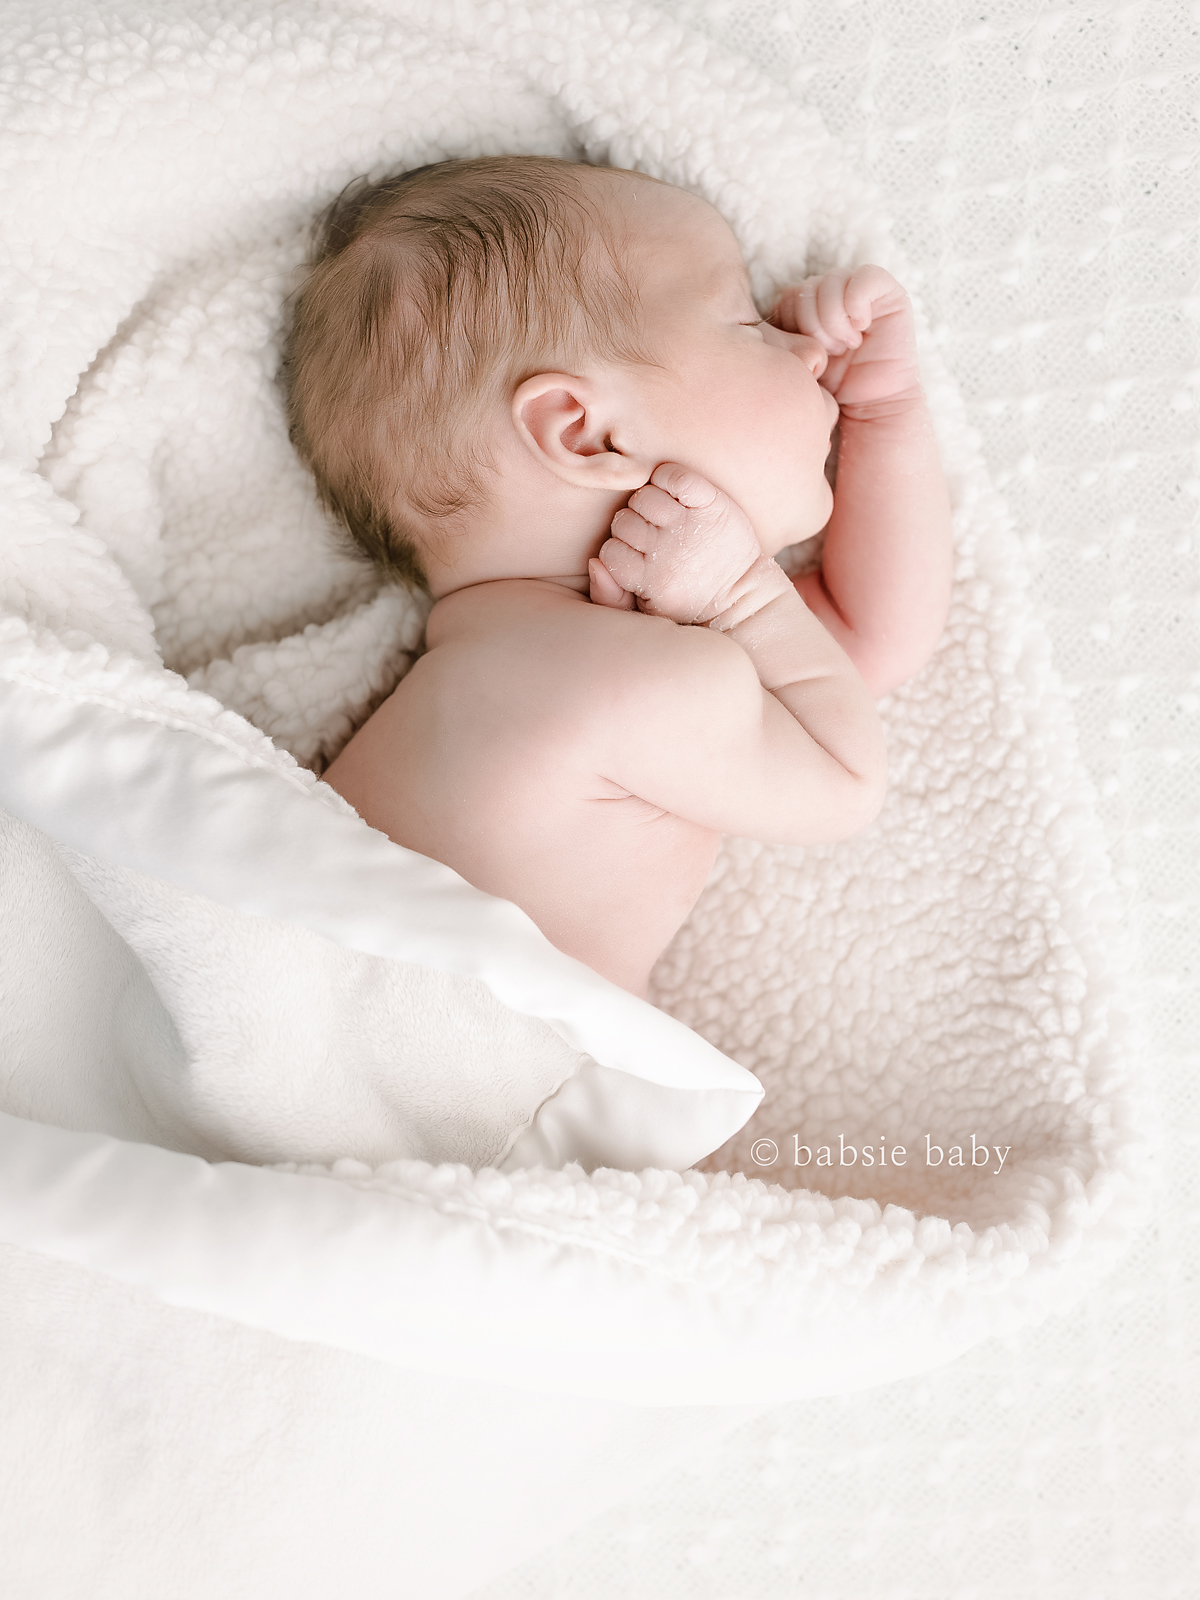 A photo of a baby girl in a natural sleeping pose.